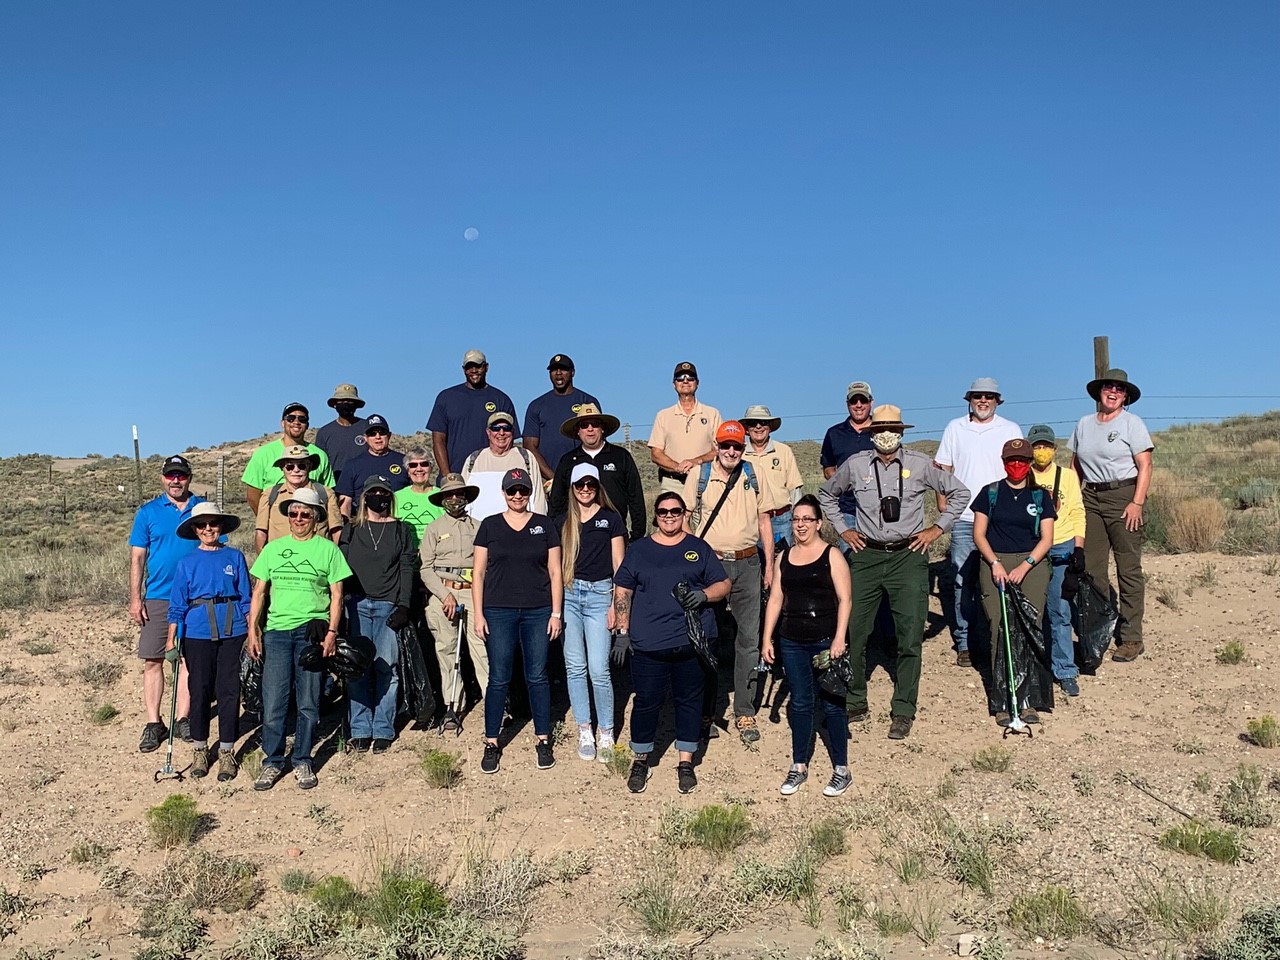 Participants included Petroglyph staff and volunteers, and staff members from Albuquerque Public Schools and Pulte Homes, and Mirehaven community members.